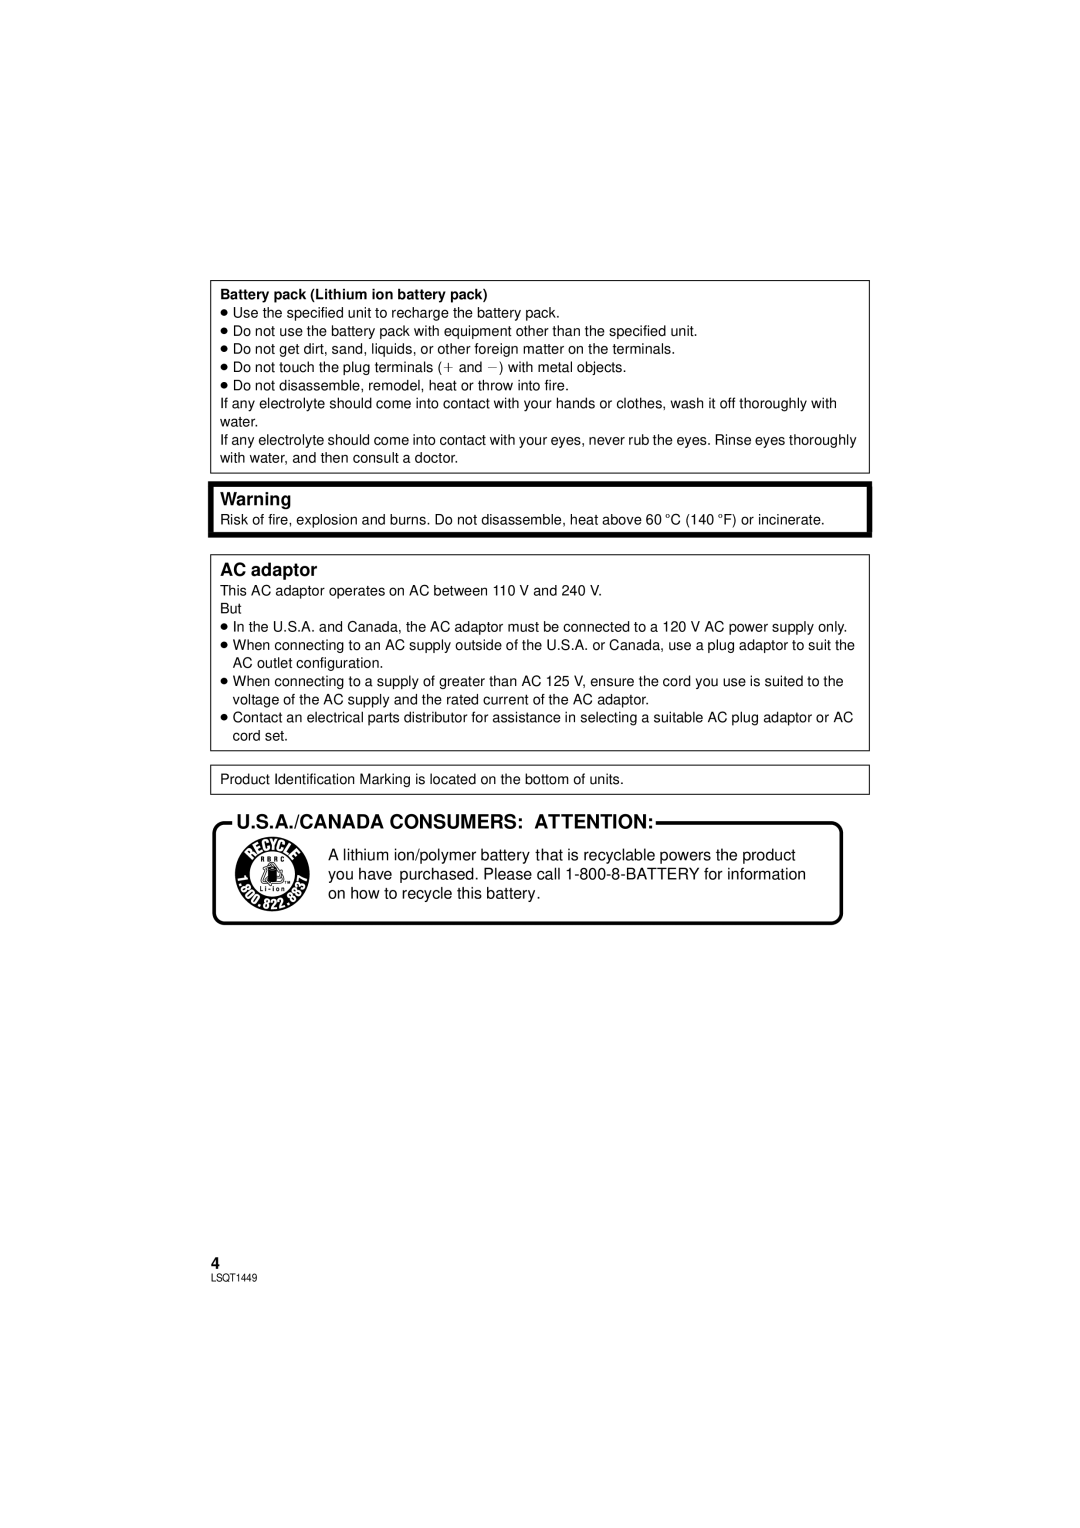 Panasonic SDR-H90PC, SDR-H80PC operating instructions U.S.A./Canada Consumers Attention, AC adaptor 